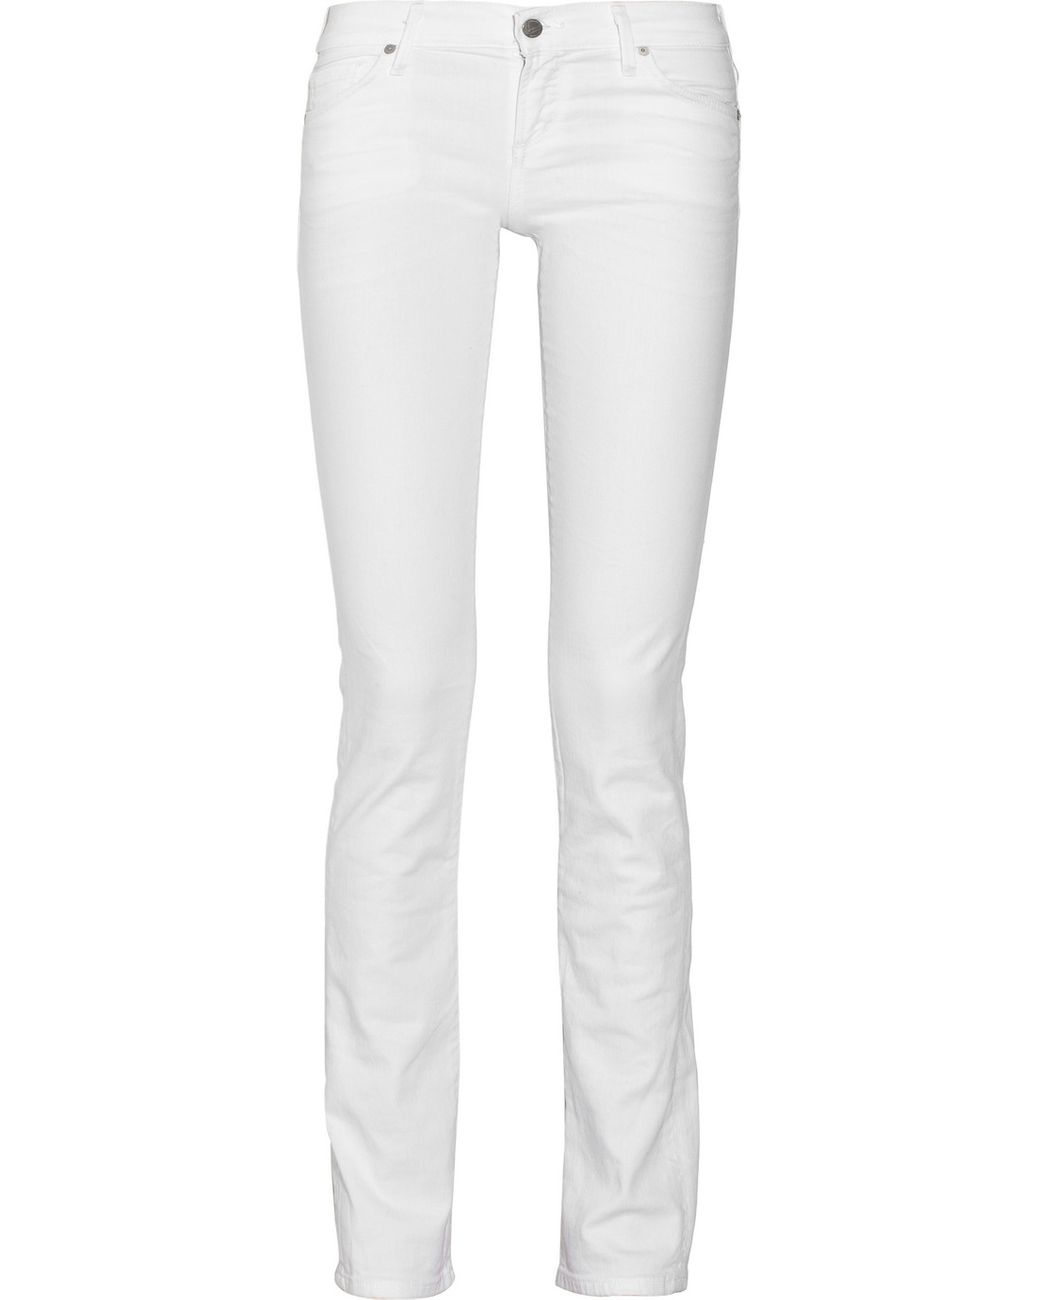 Citizens of Humanity Ava Low-rise Straight-leg Jeans in White | Lyst